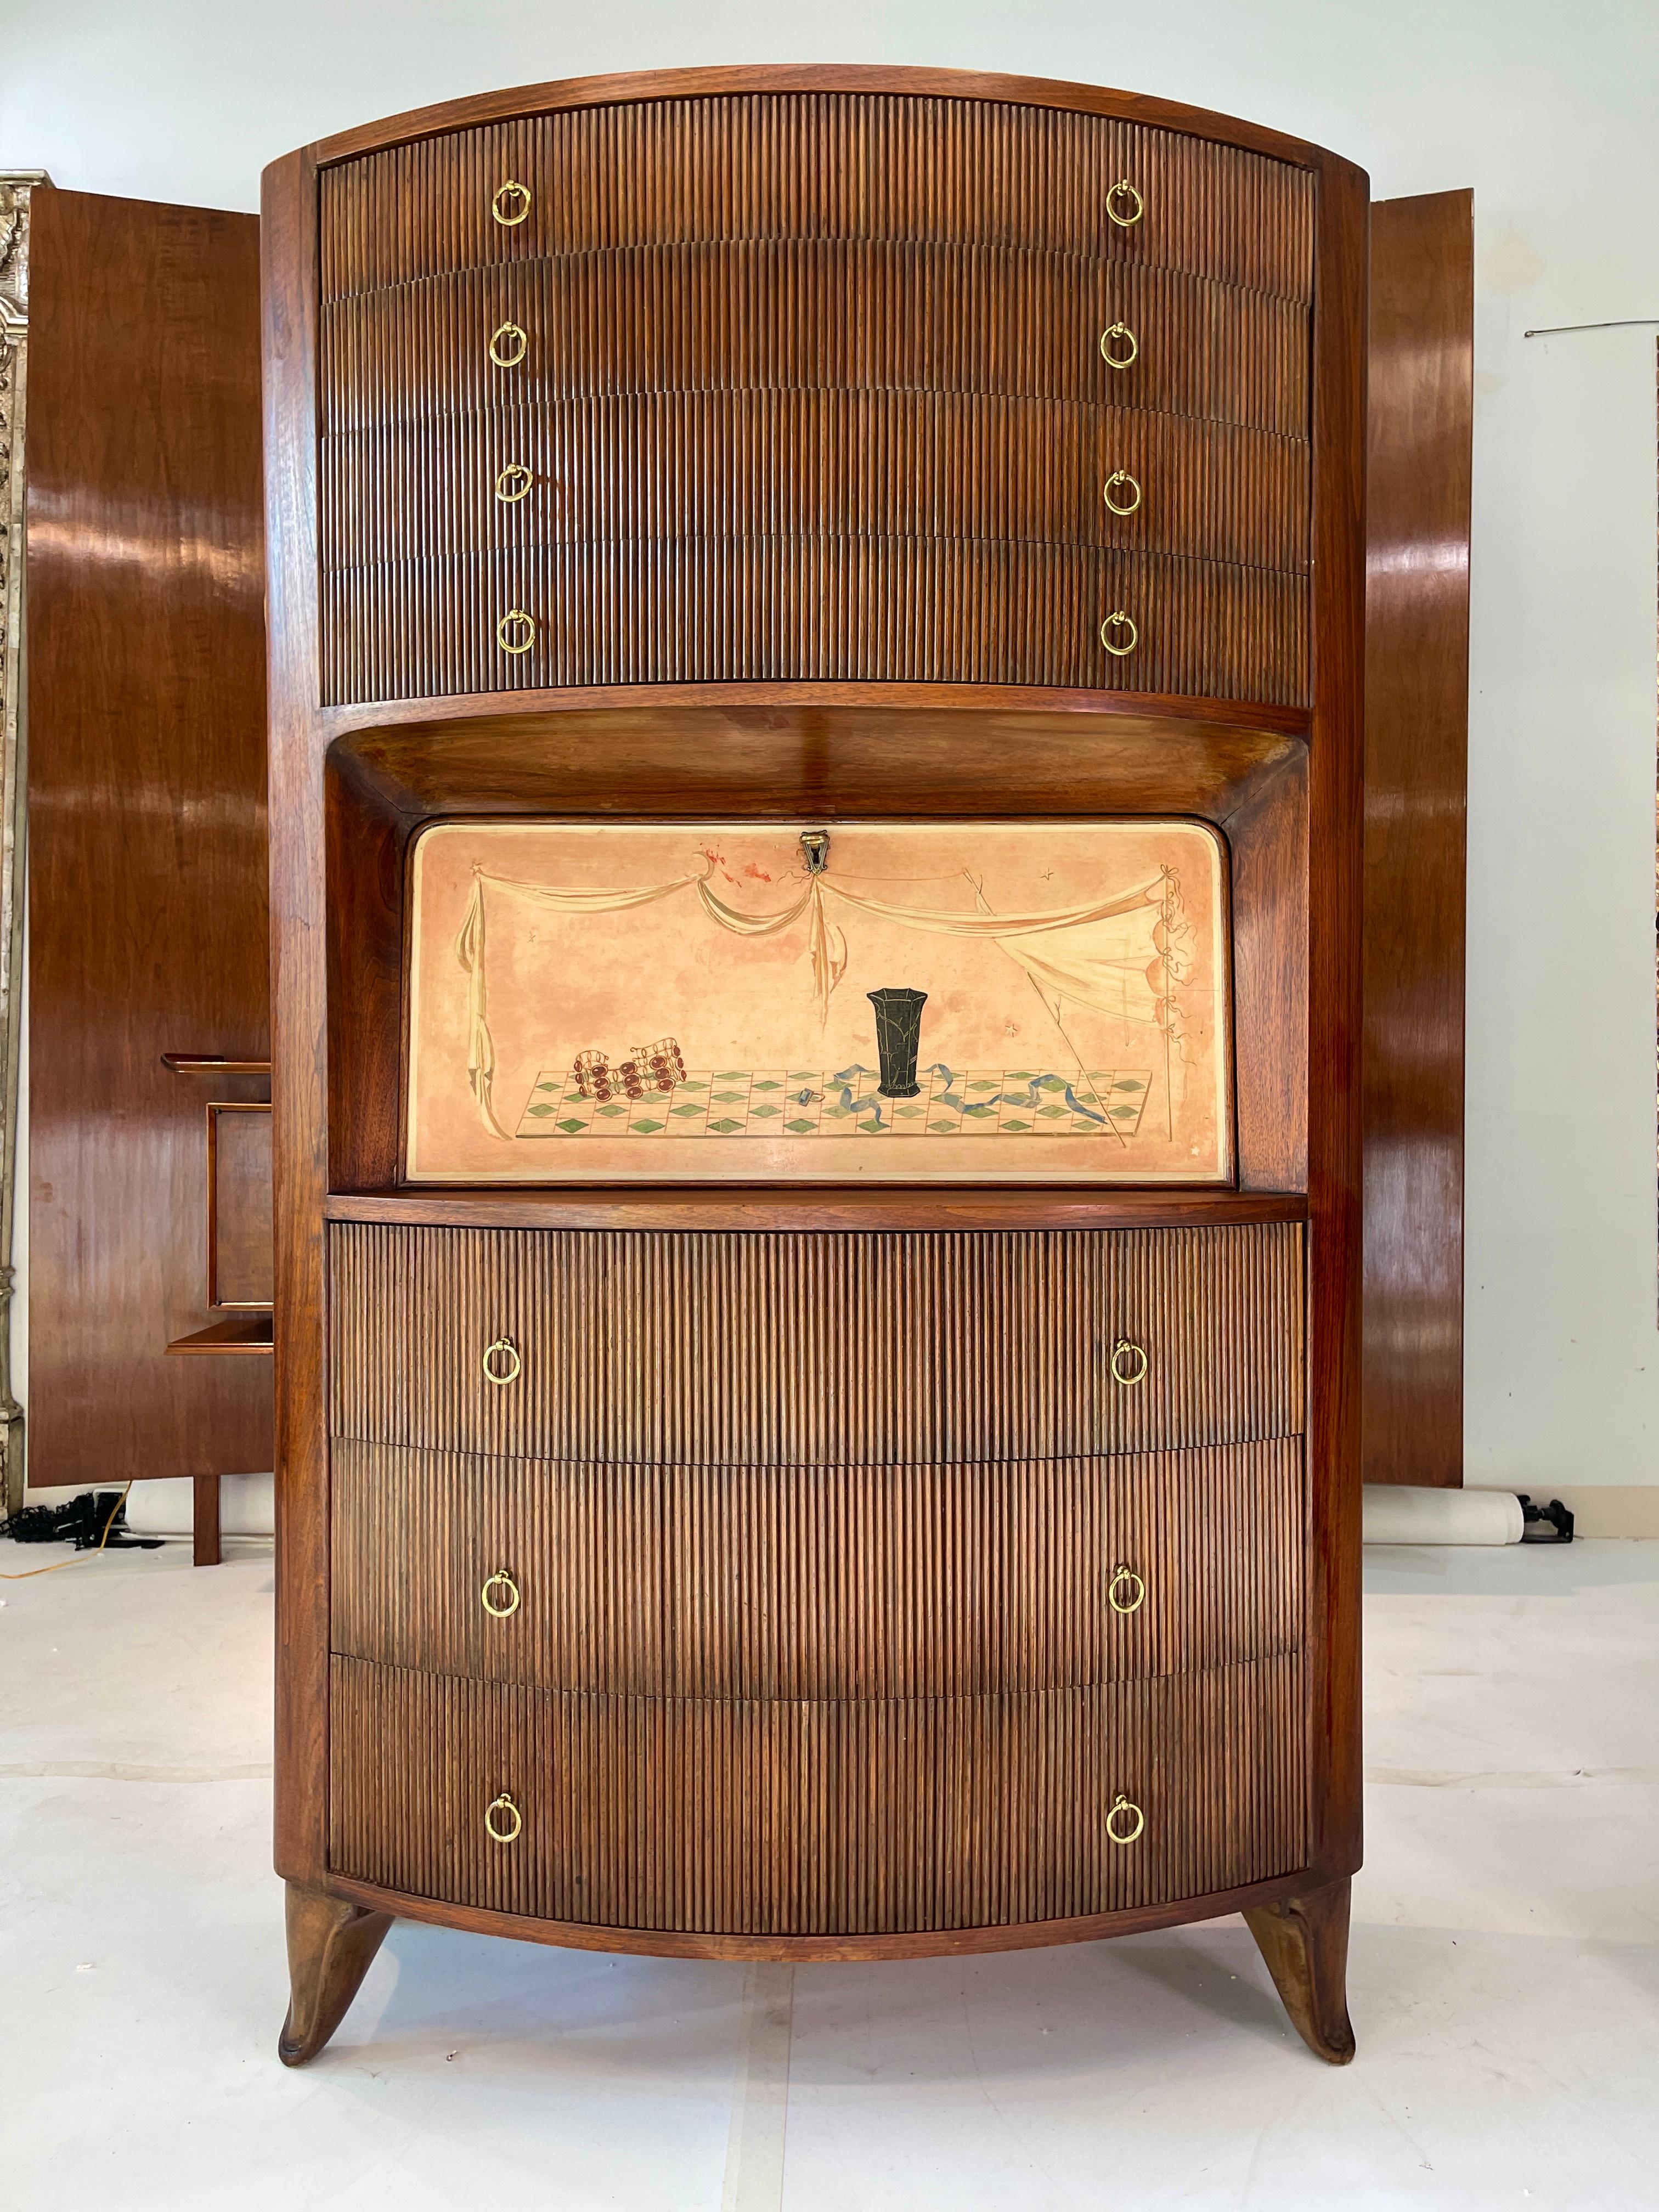 Rare and very unusual piece of Italian modern design.
Vintage 1940s Italian bow-fronted secretary in walnut with seven drawers with brass ring pulls, attributed to Osvaldo Borsani.
The curved drawer faces are applied with vertical reeding in walnut.